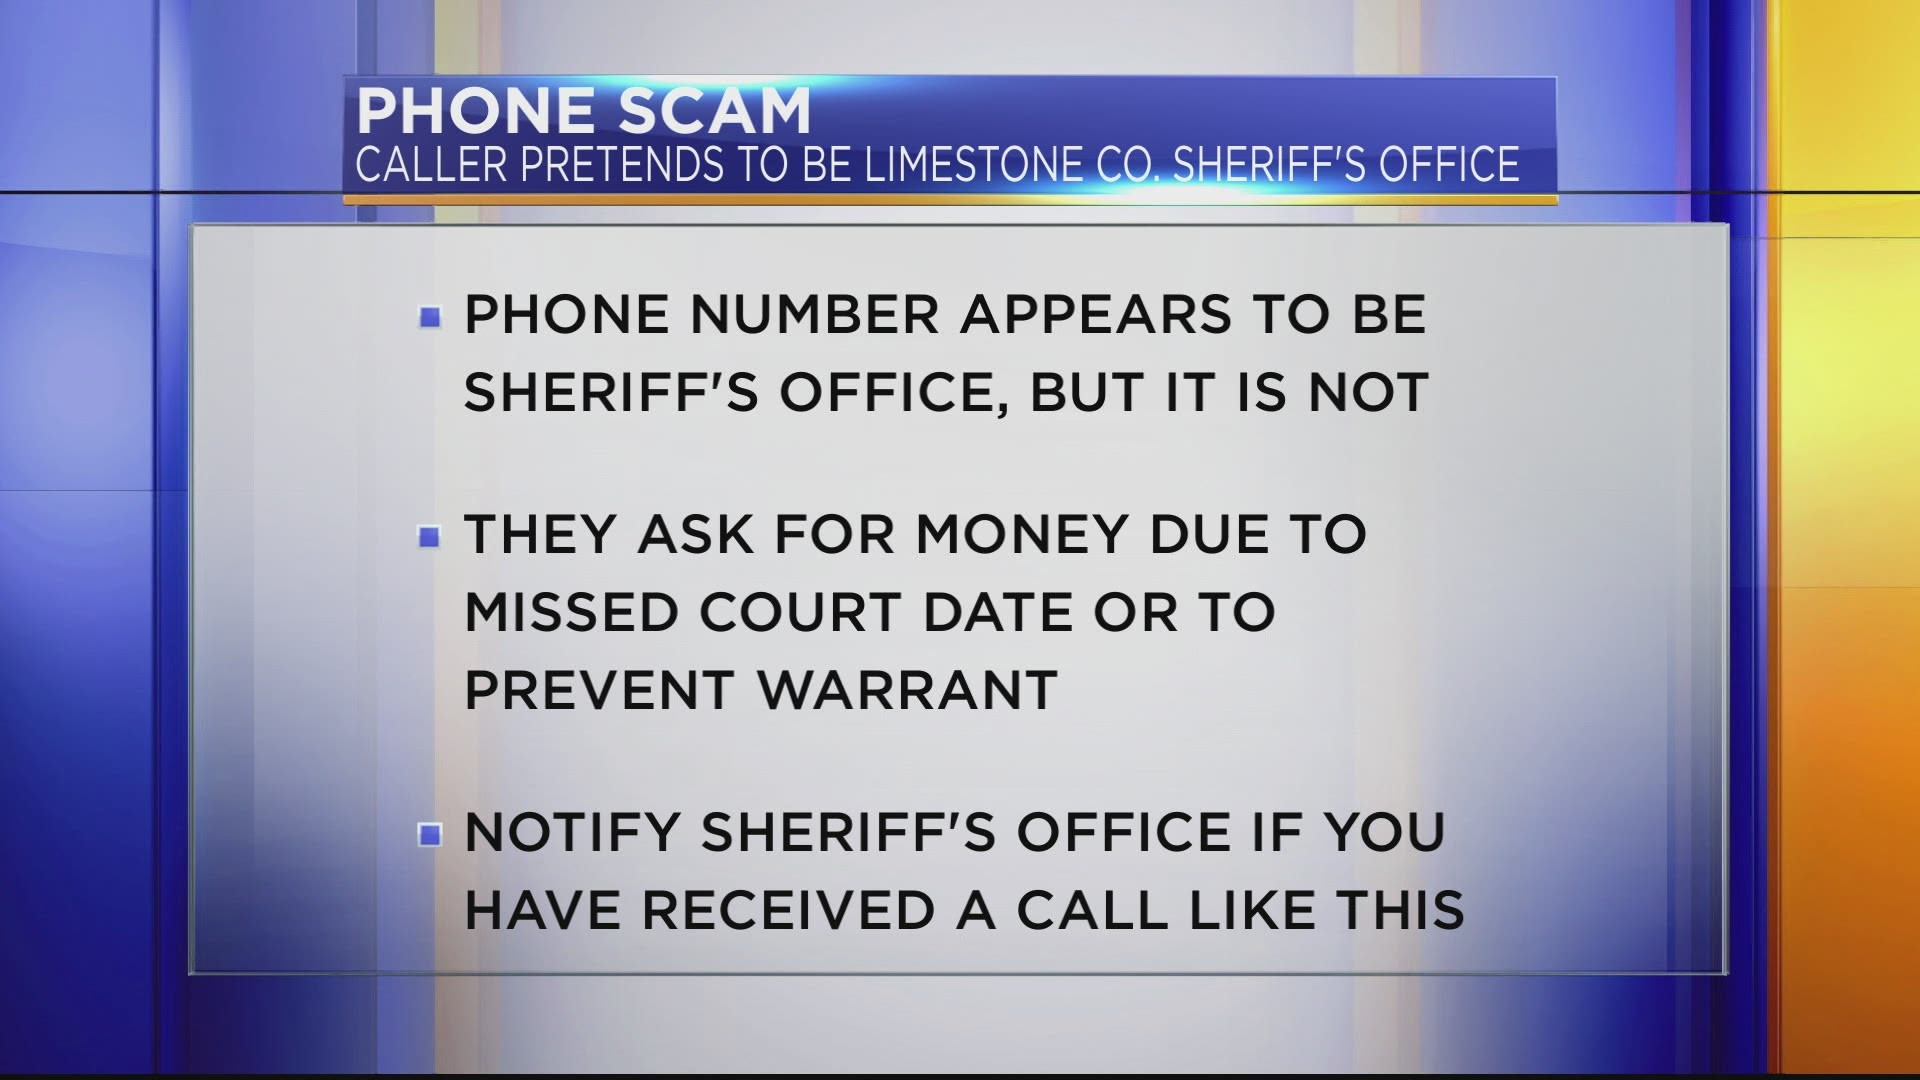 If someone calls claiming to be with the Limestone County Sheriff's Office and demands money, hang up.